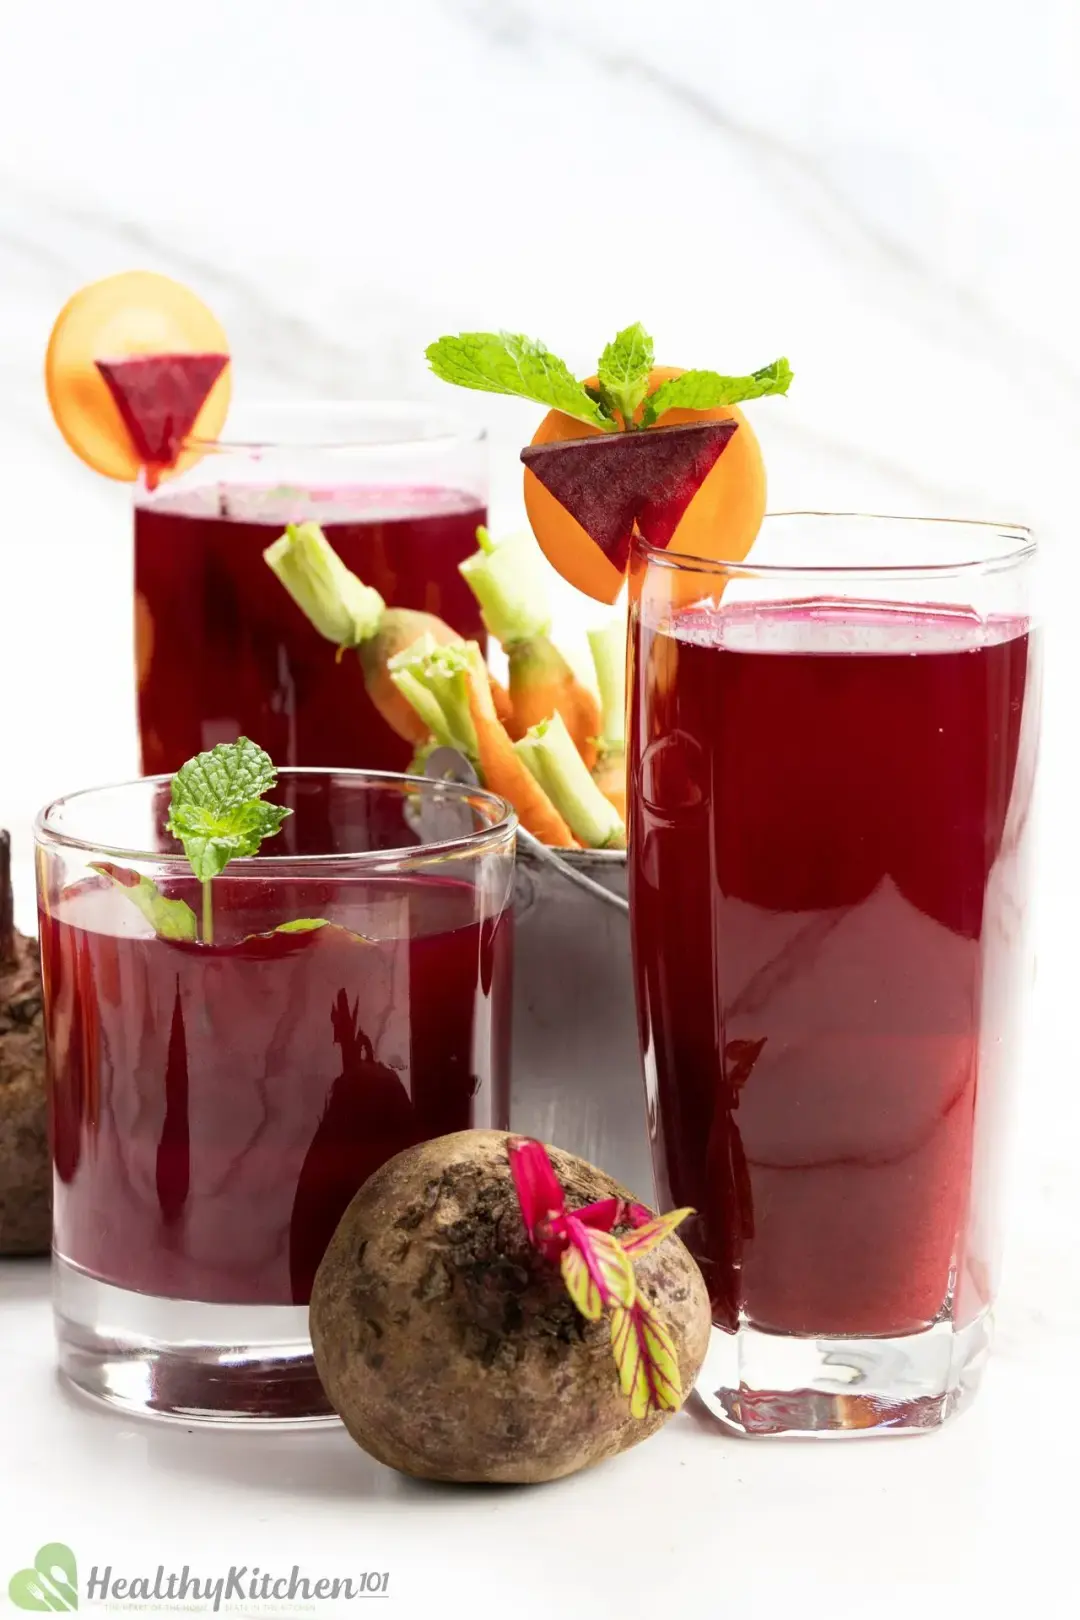 Three glasses of beet juice with carrot as garnish and a beetroot in the front